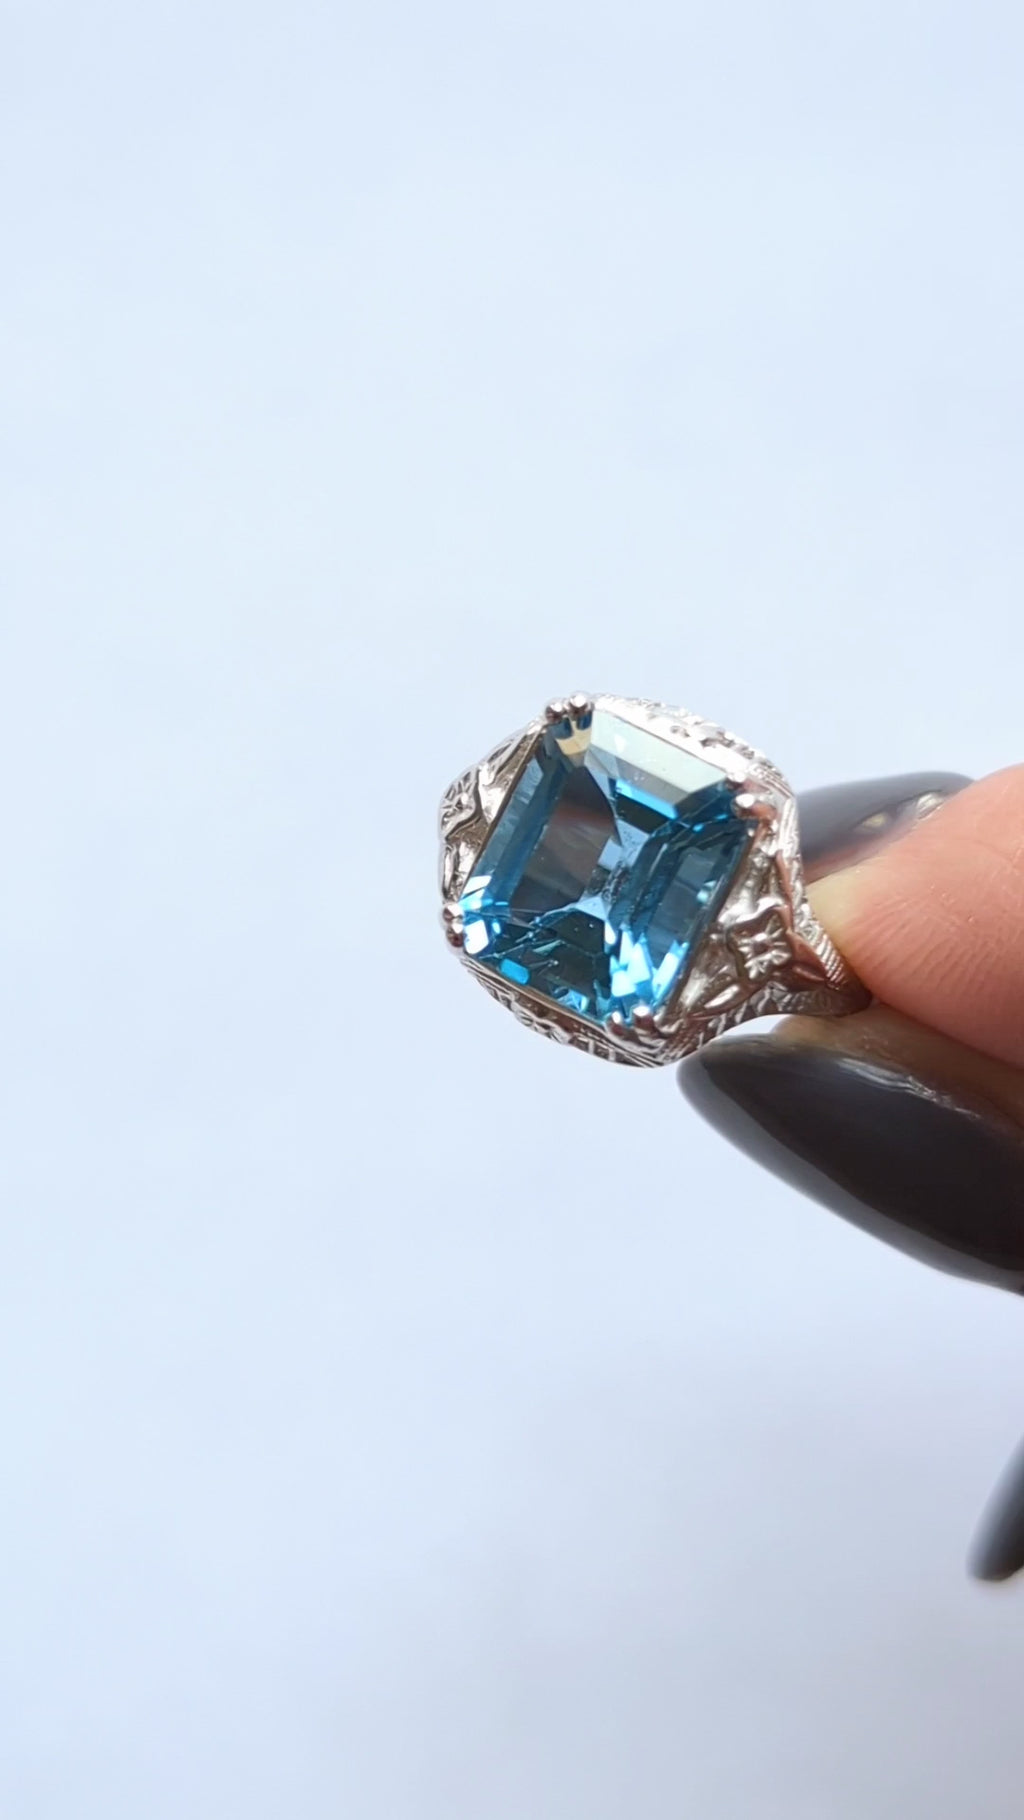 SWISS BLUE TOPAZ STERLING SILVER VINTAGE STYLE RING DECO EMERALD CUT FILIGREE